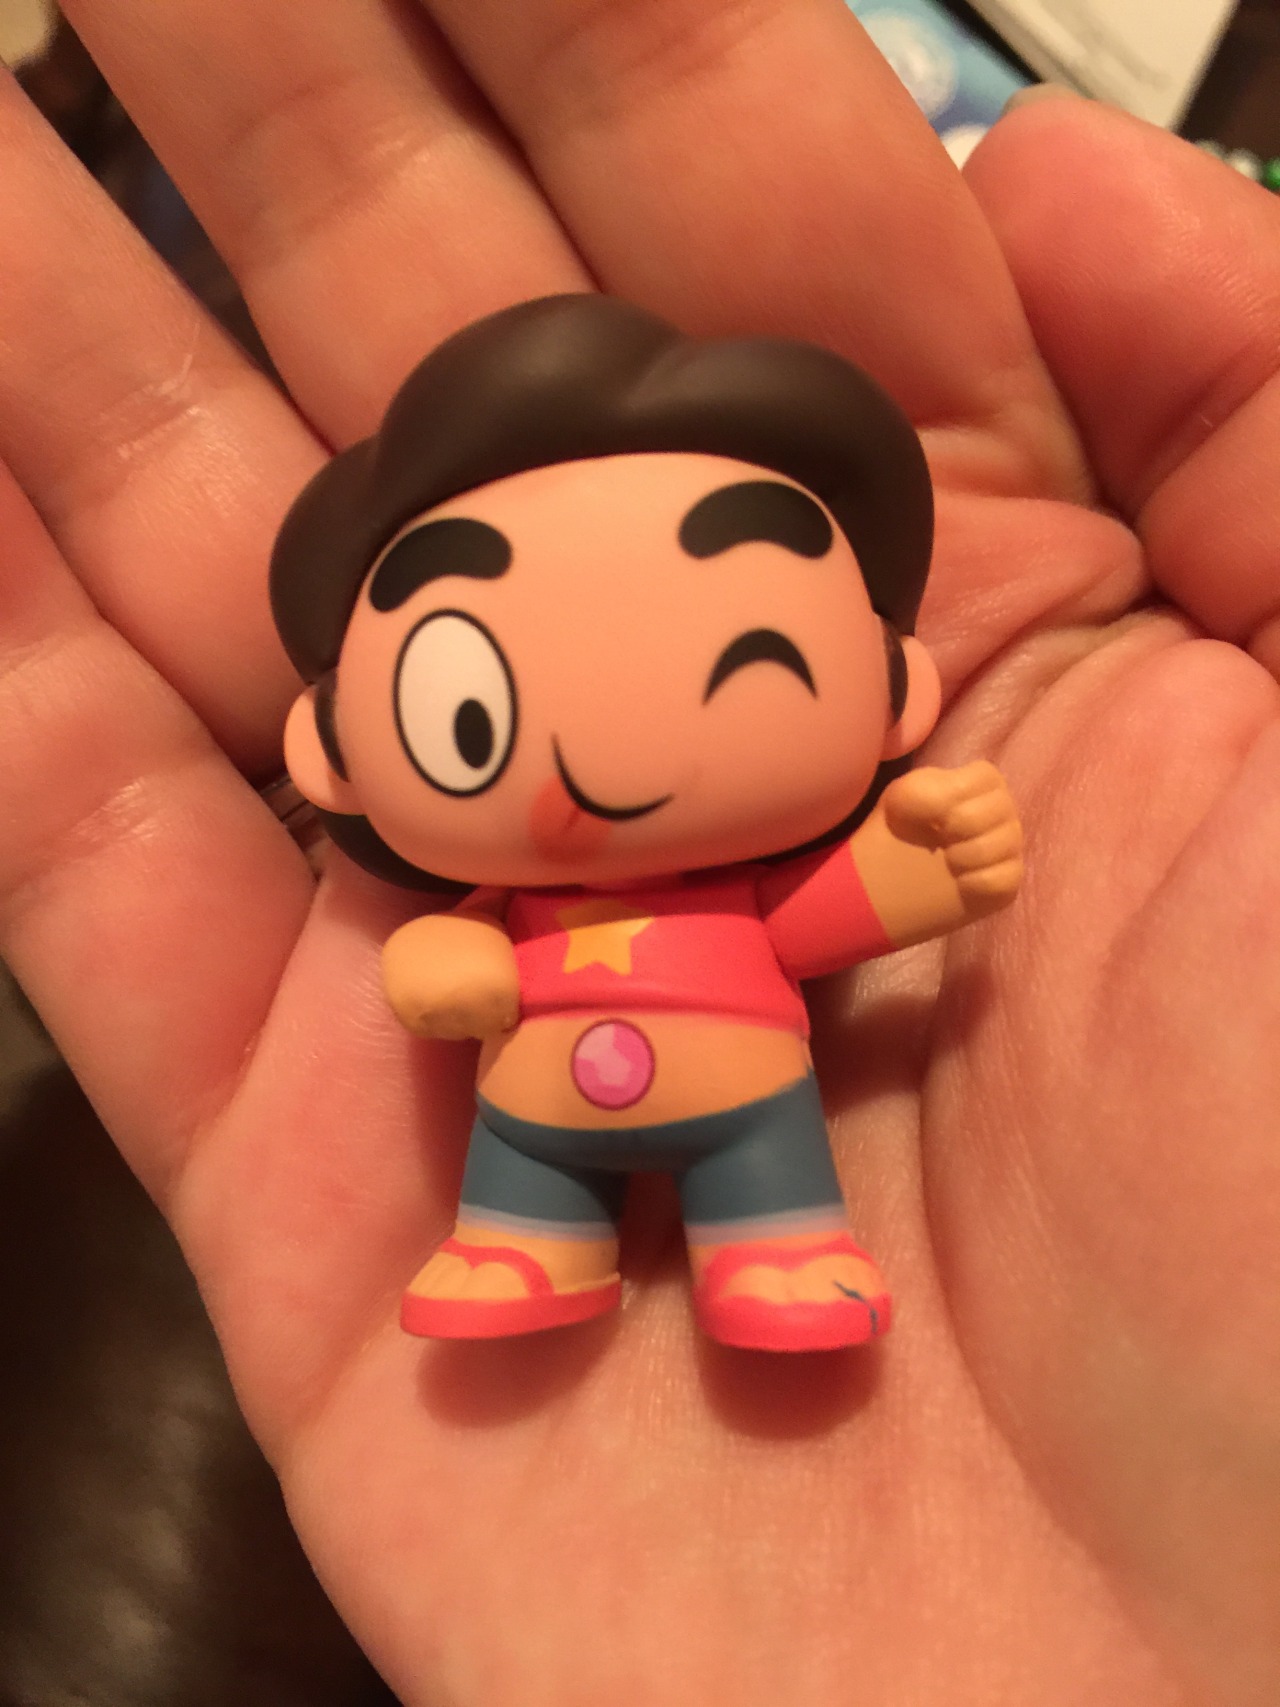 nerdy-knitter:  nerdy-knitter:  My husband surprised me with one of the Funko vinyl